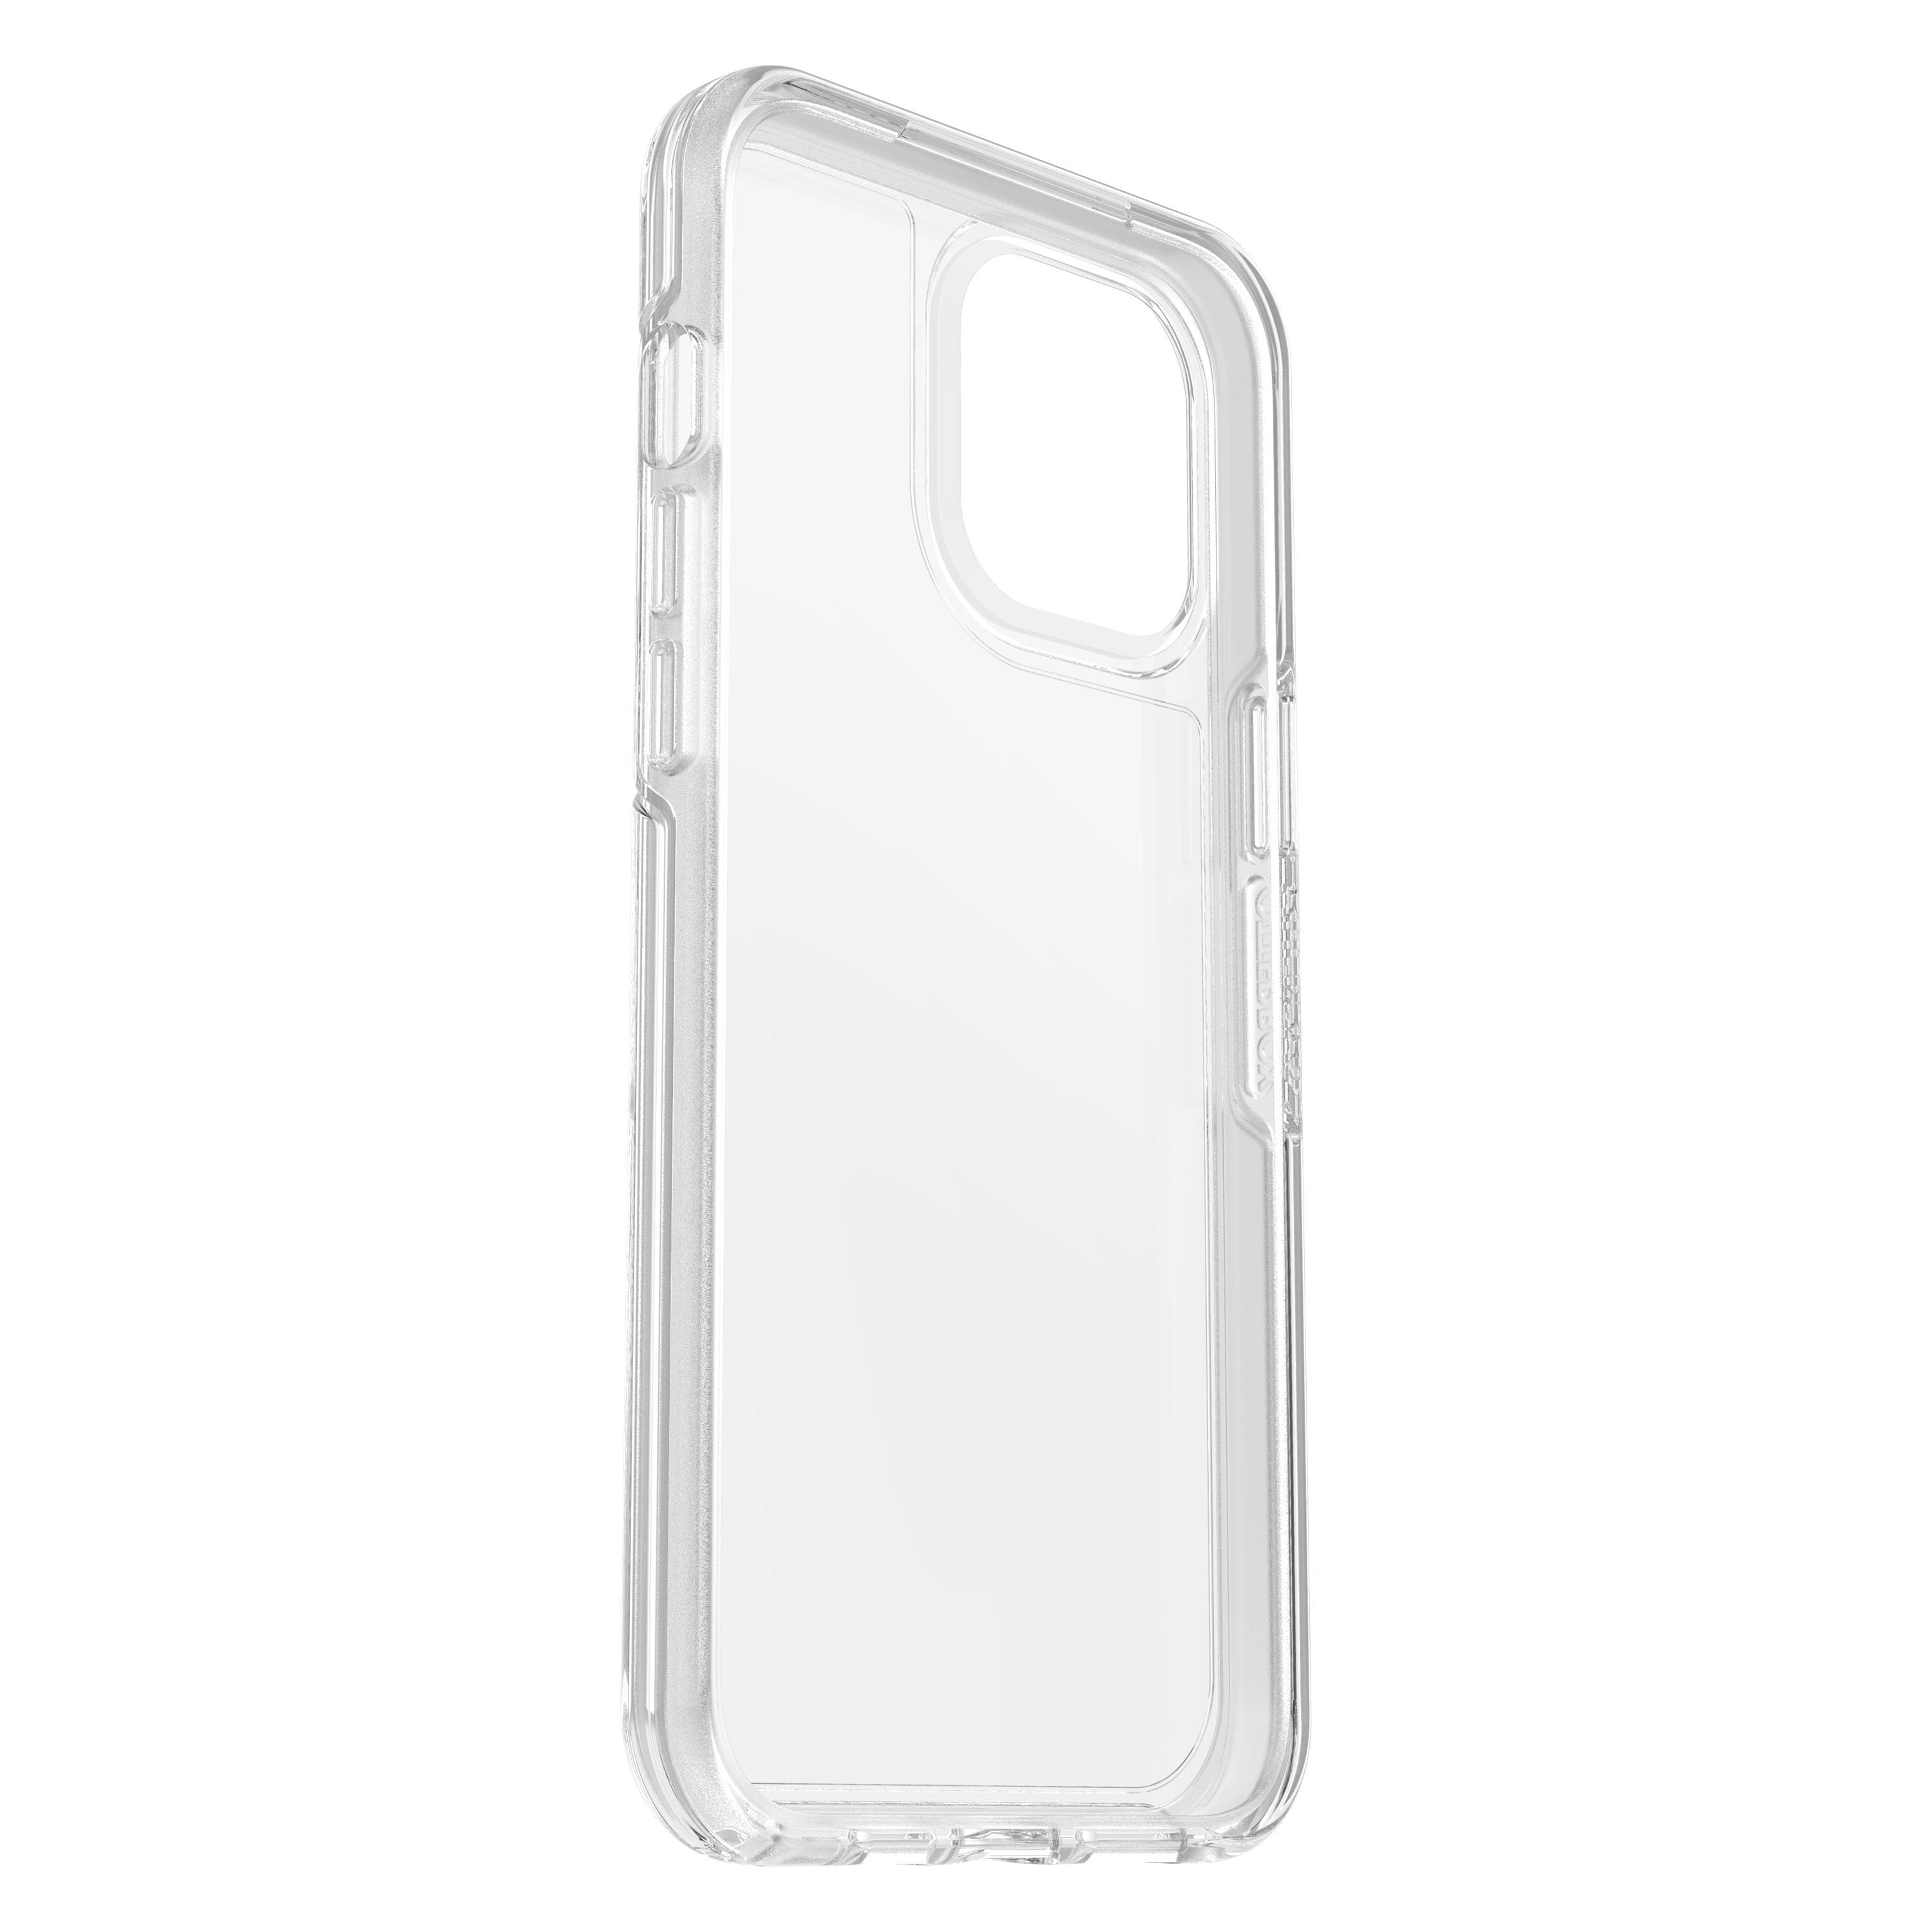 OTTERBOX Symmetry Clear + Alpha Transparent iPhone Backcover, 12 Max, Glass, Pro Apple